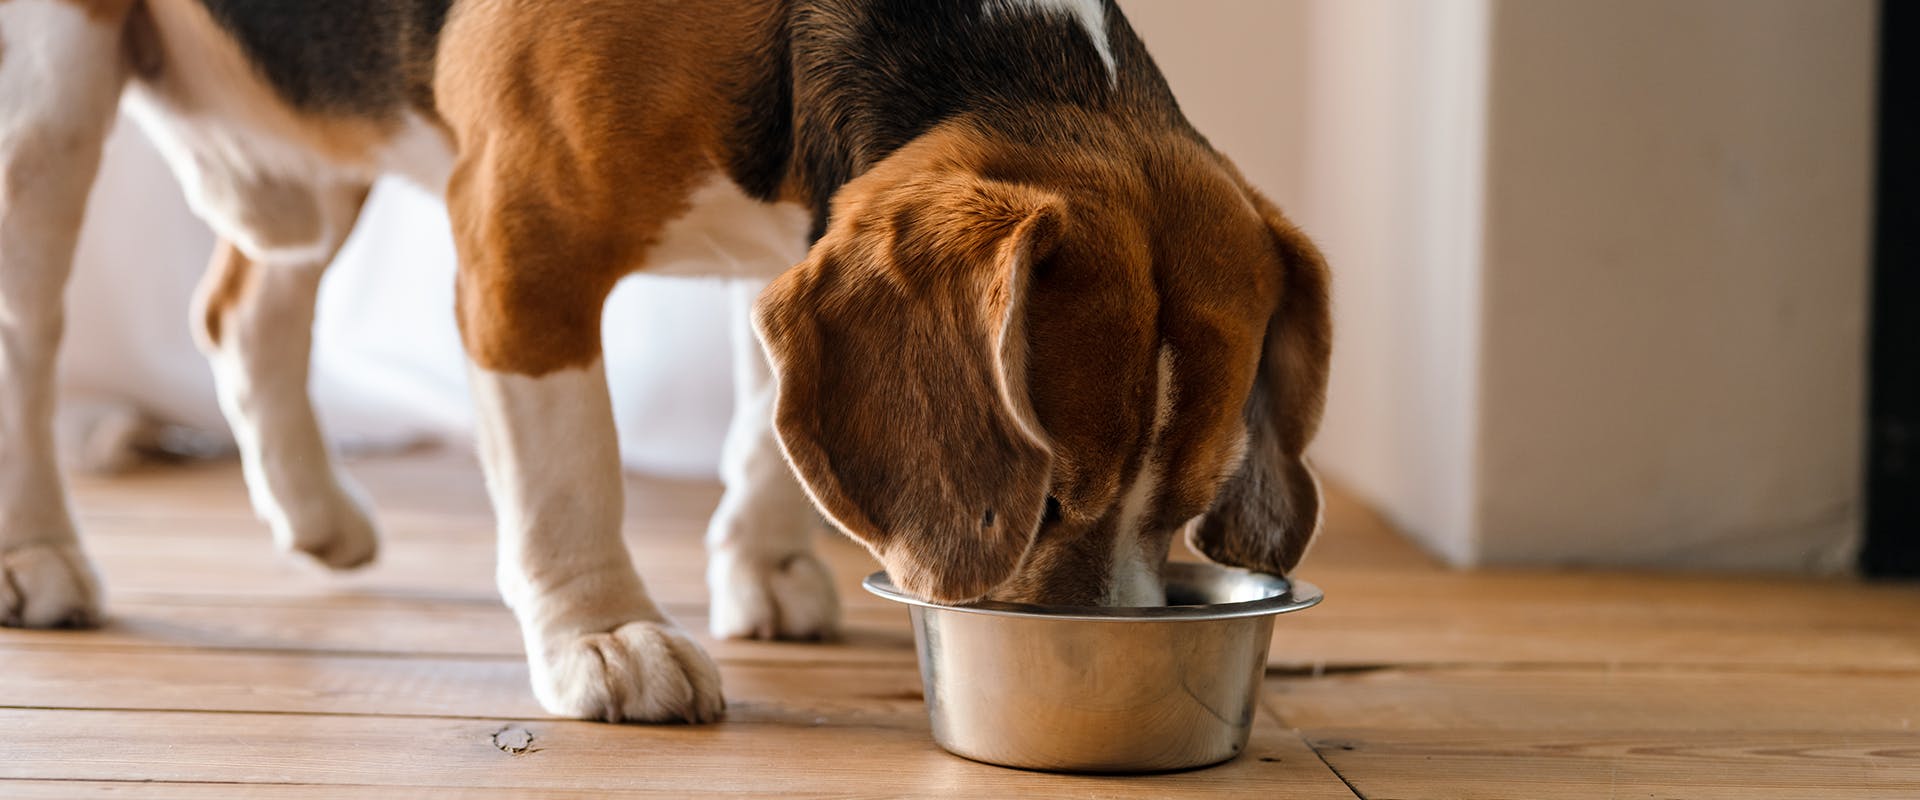 A dog eating from a stainless steel dog bowl